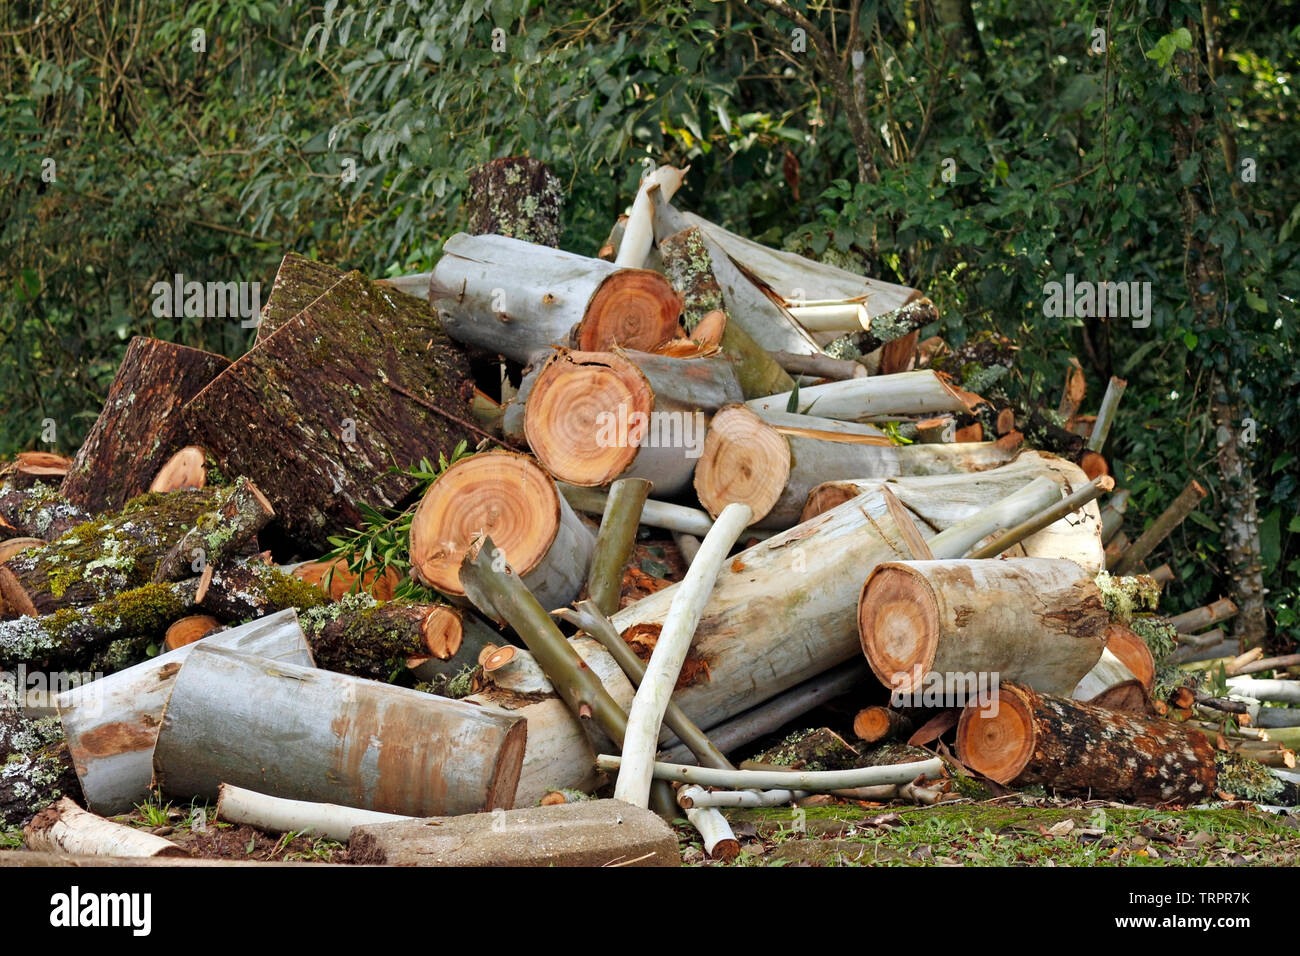 The cutting of reforestation trees usually occurs in the fall. Stock Photo